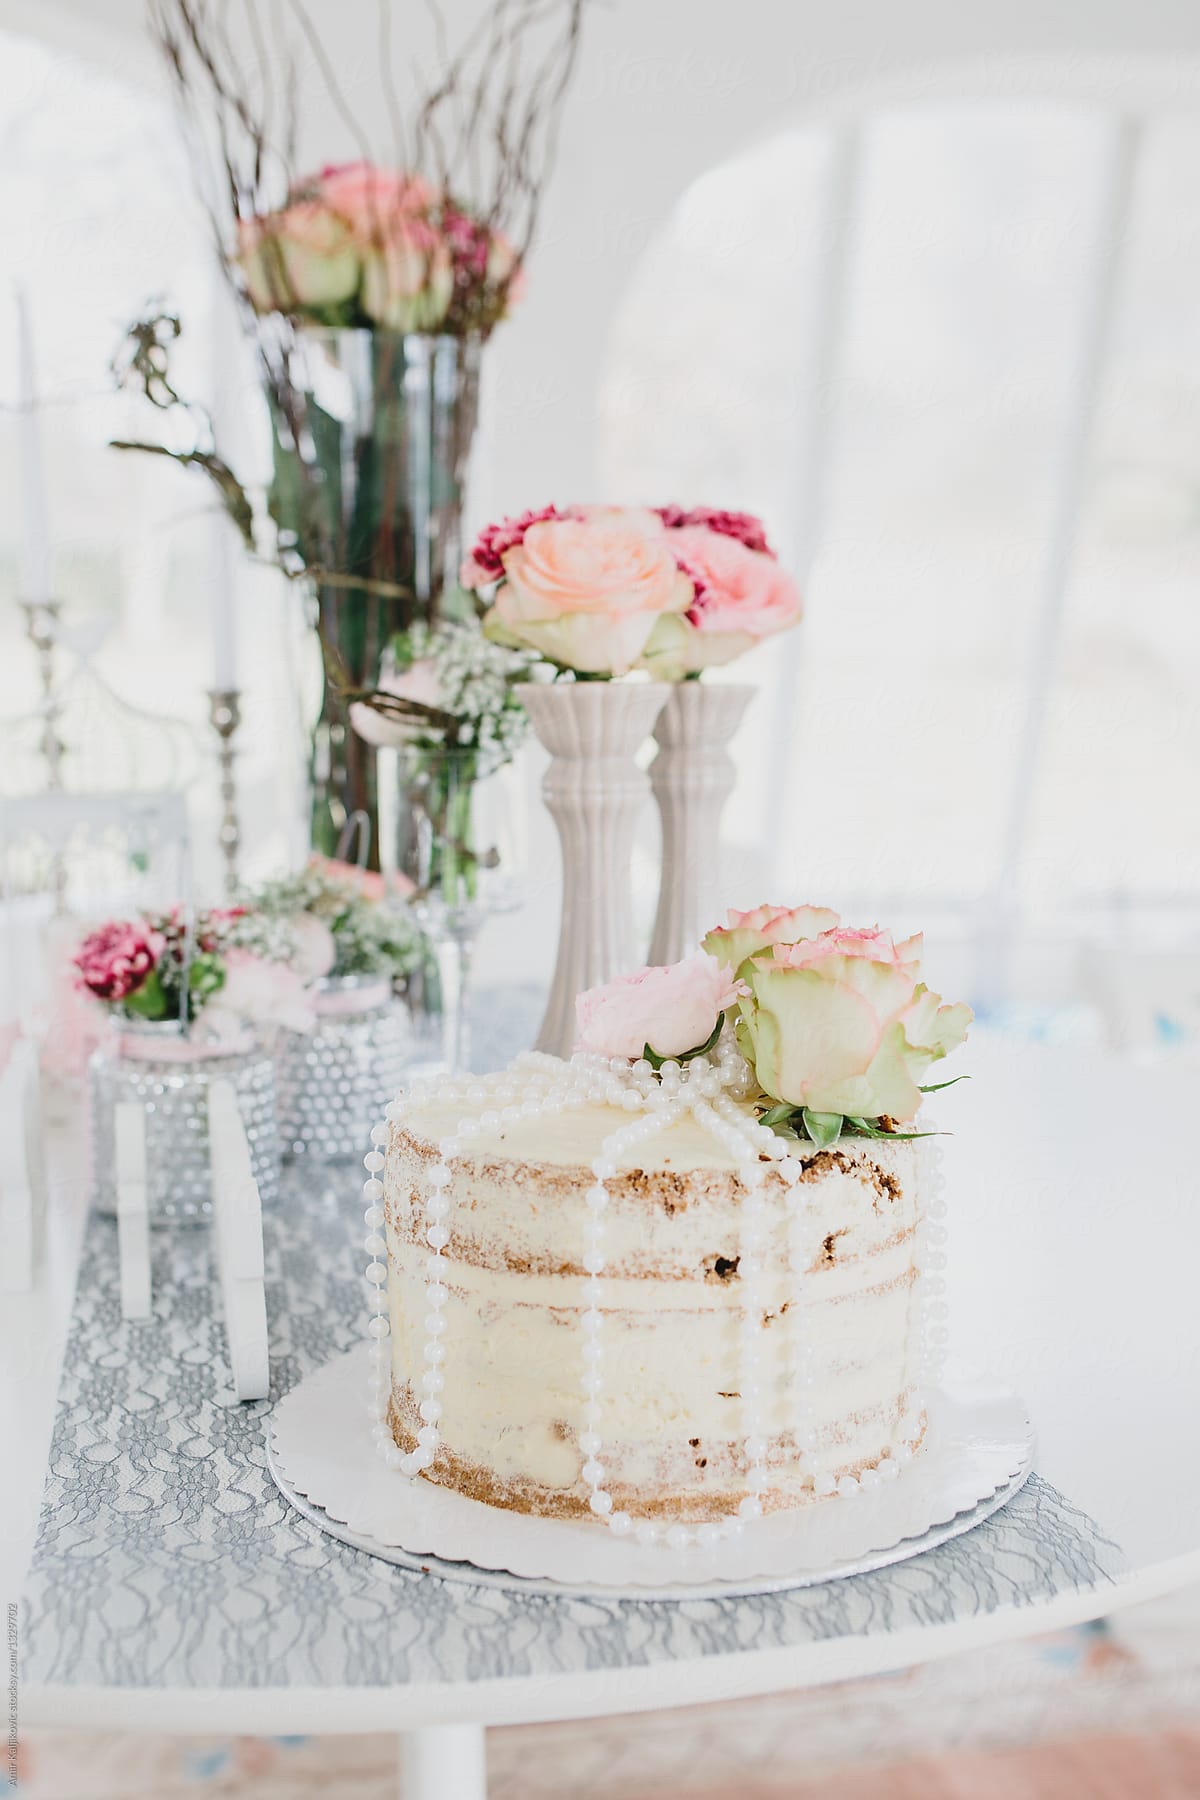 Wedding cake at reception with flower bouquet